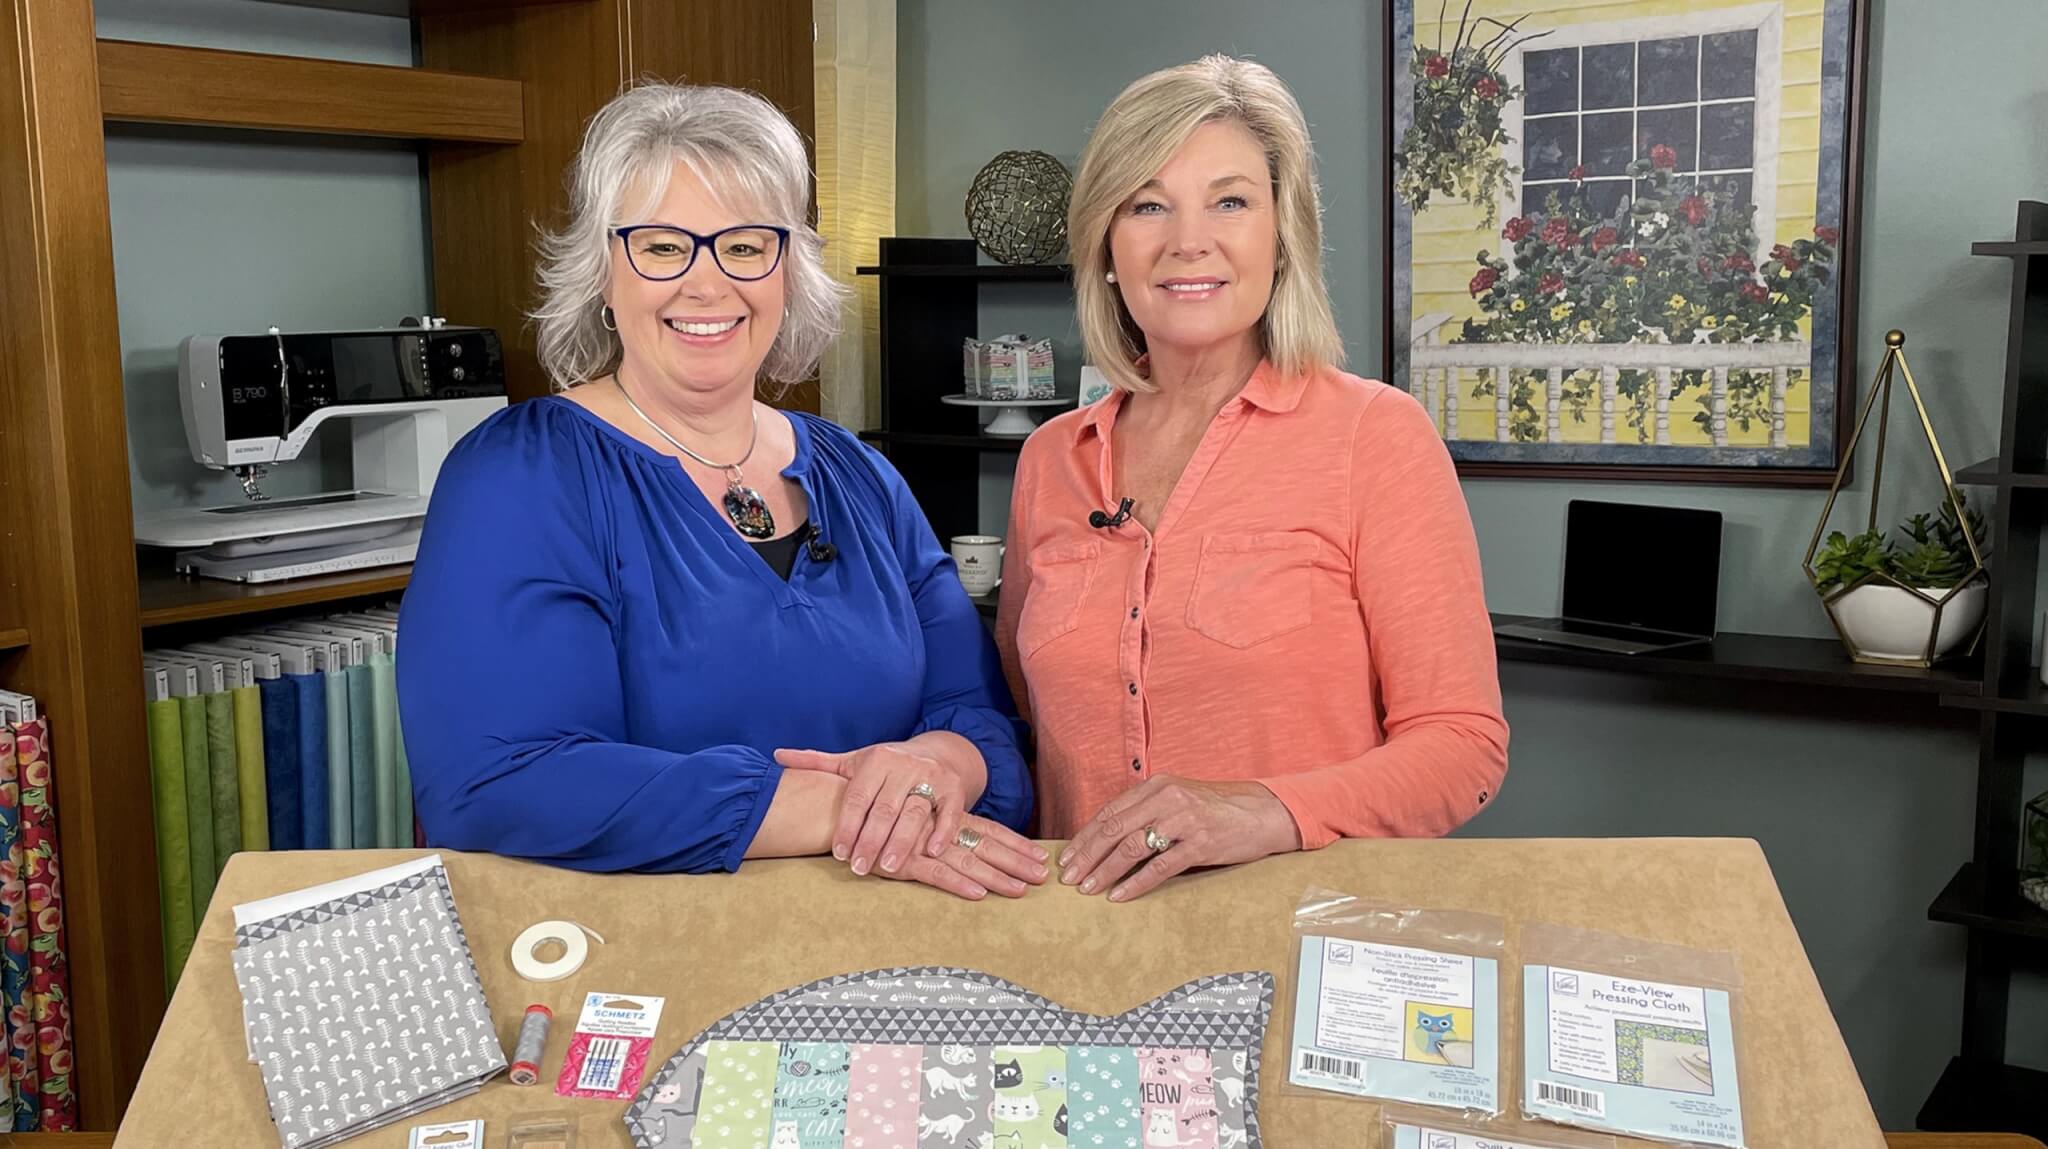 Stitch it! Sisters NEW Quilt As You Go Pet Placemats Tutorial by the Stitch it! Sisters with guest Jill Repp from June Tailor at Nancy Zieman Productions